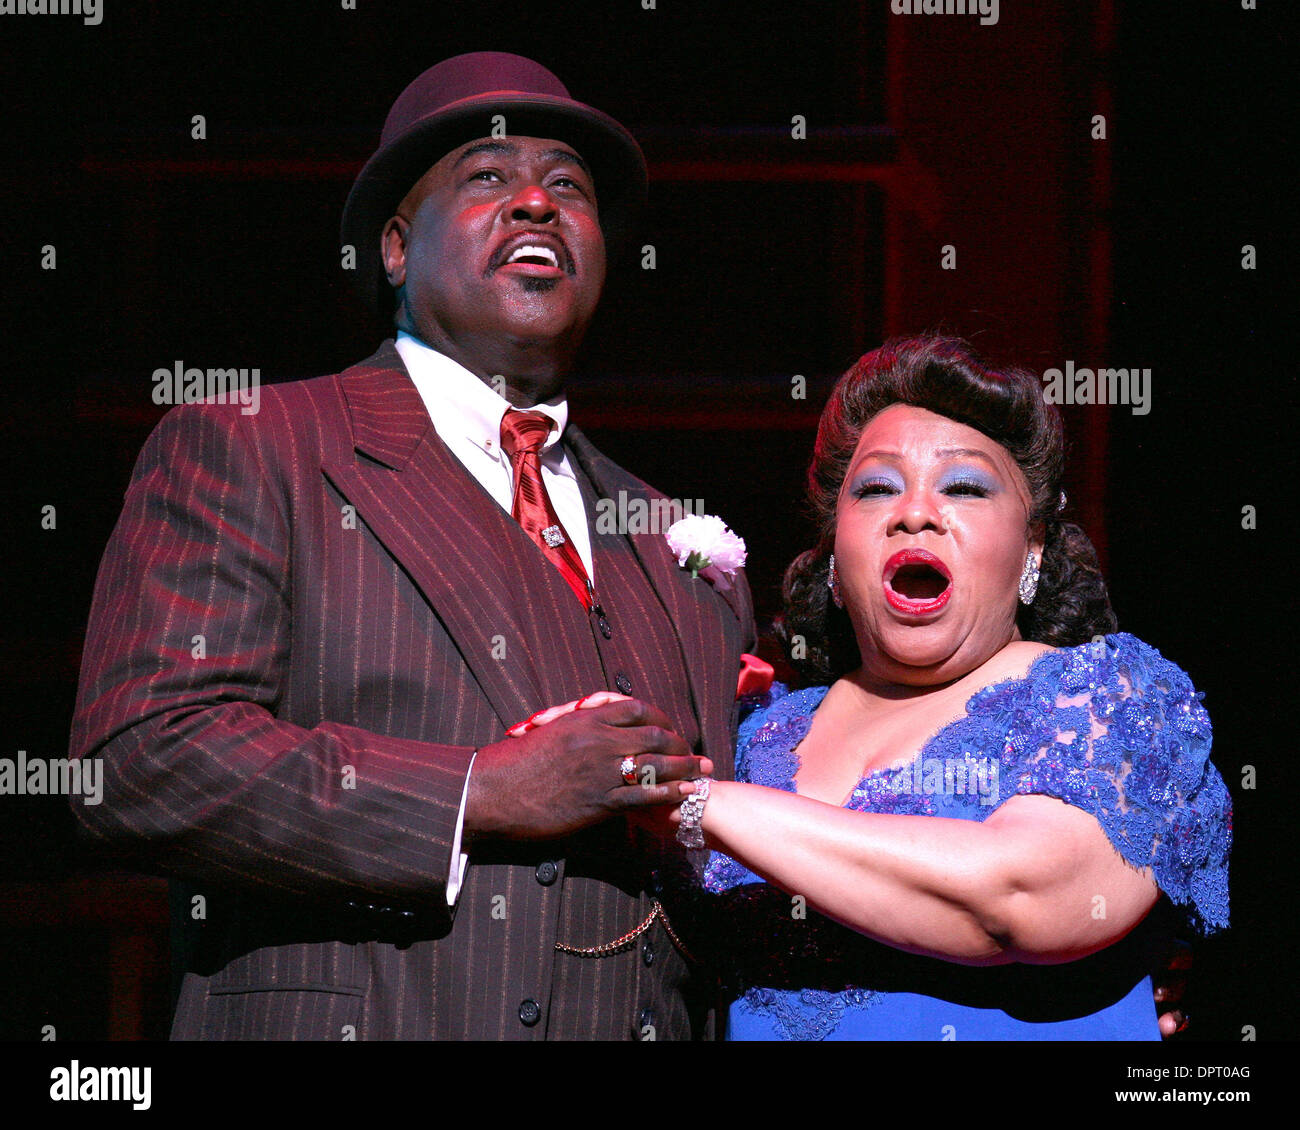 Apr 17, 2009 - Los Angeles, California, United States - Artists DOUG ESKEW and ARMELIA MCQUEEN perform on stage during a dress rehearsal for the musical show Ain't Misbeavin at the Ahmanson Theatre. (Credit Image: © Ringo Chiu/ZUMA Press) Stock Photo